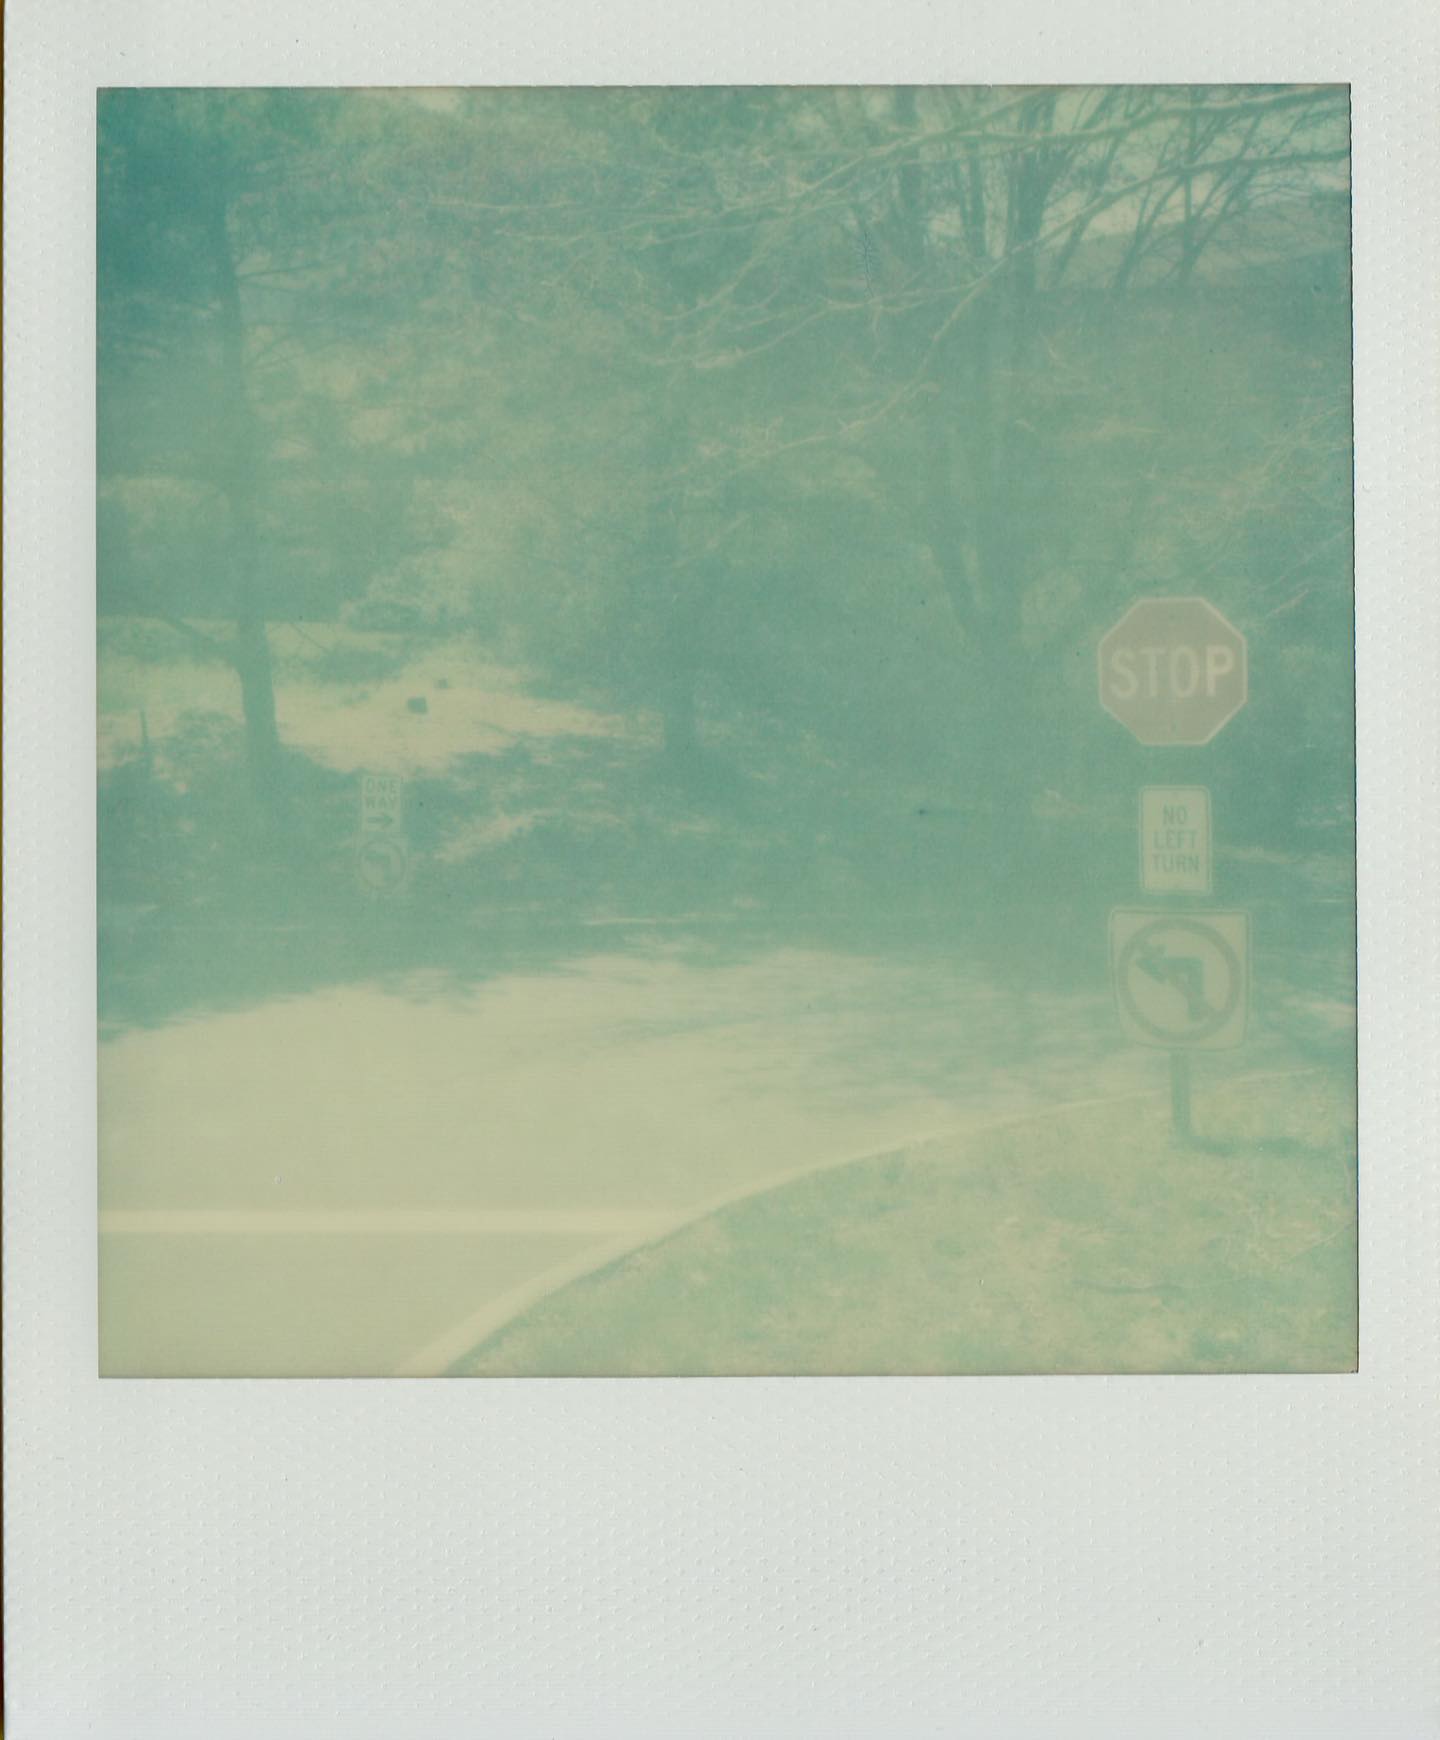 Stop

More expired color beta film by Impossible Project made in 2016. #mintcamera #slr670s #slr670 #polaroid #film #filmphotography